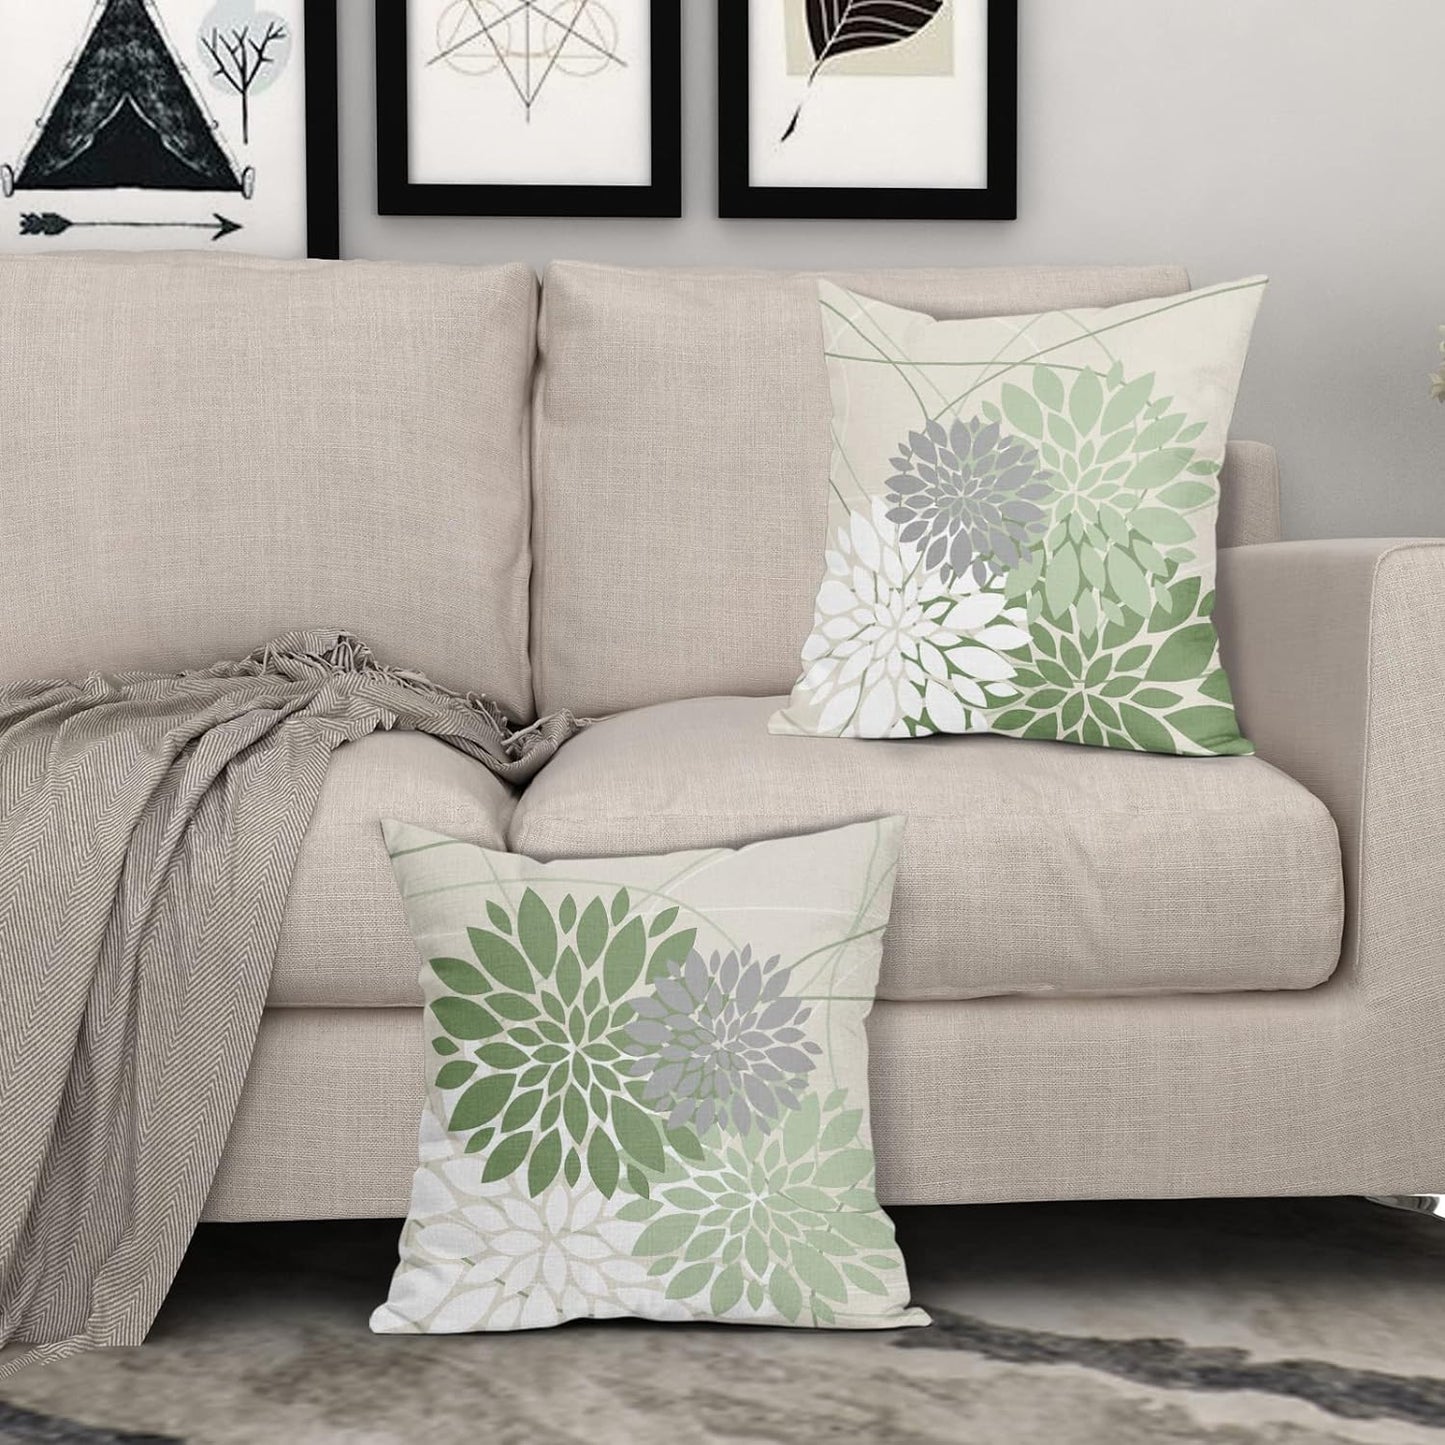 Lovvewhome Sage Green Dahlia Pillow Covers 18X18 Inch Spring Geometric Floral Elegant Line Modern Flower Pillow Case Farmhouse Outdoor Decor for Home Bedroom Living Room Linen Square Cushion Cover, Set of 2